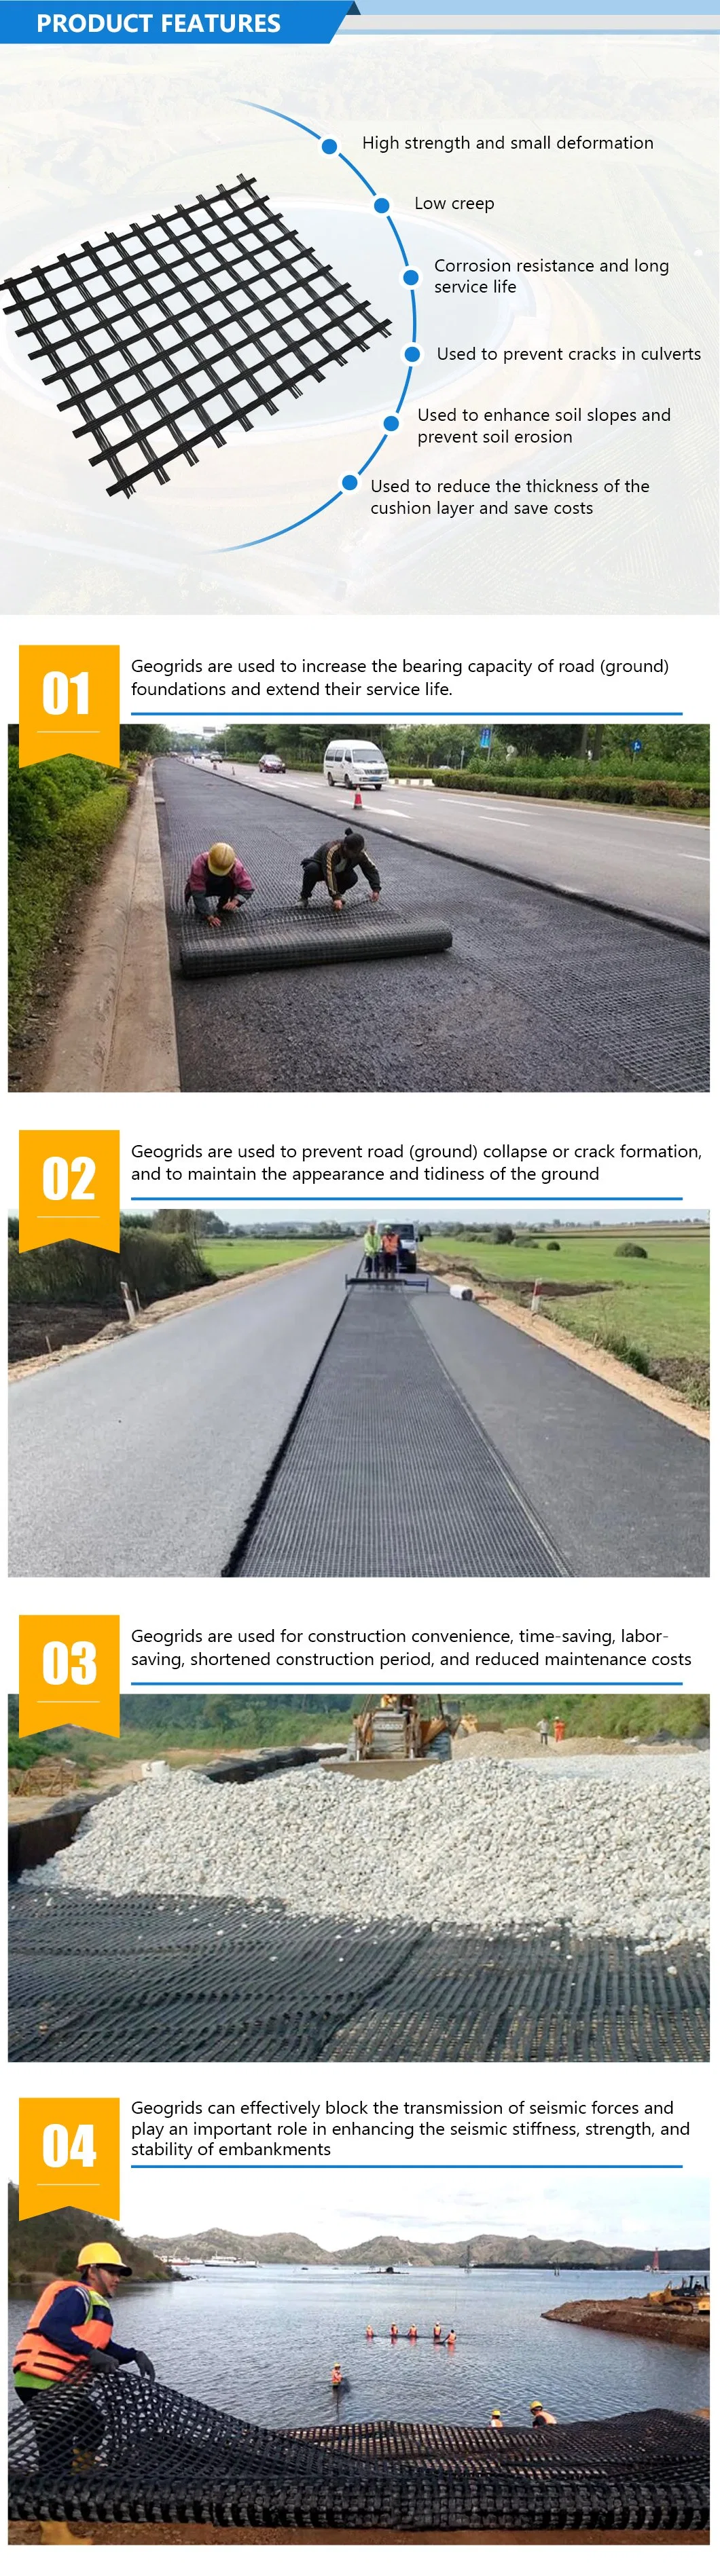 Customzied 150kn PP Plastic Biaxial Geogrid Manufacturer for Dam and Roadbed/Slope Protection/Wall Reinforcement/Roadbed Bearing Capacity Improvement in Airfiel